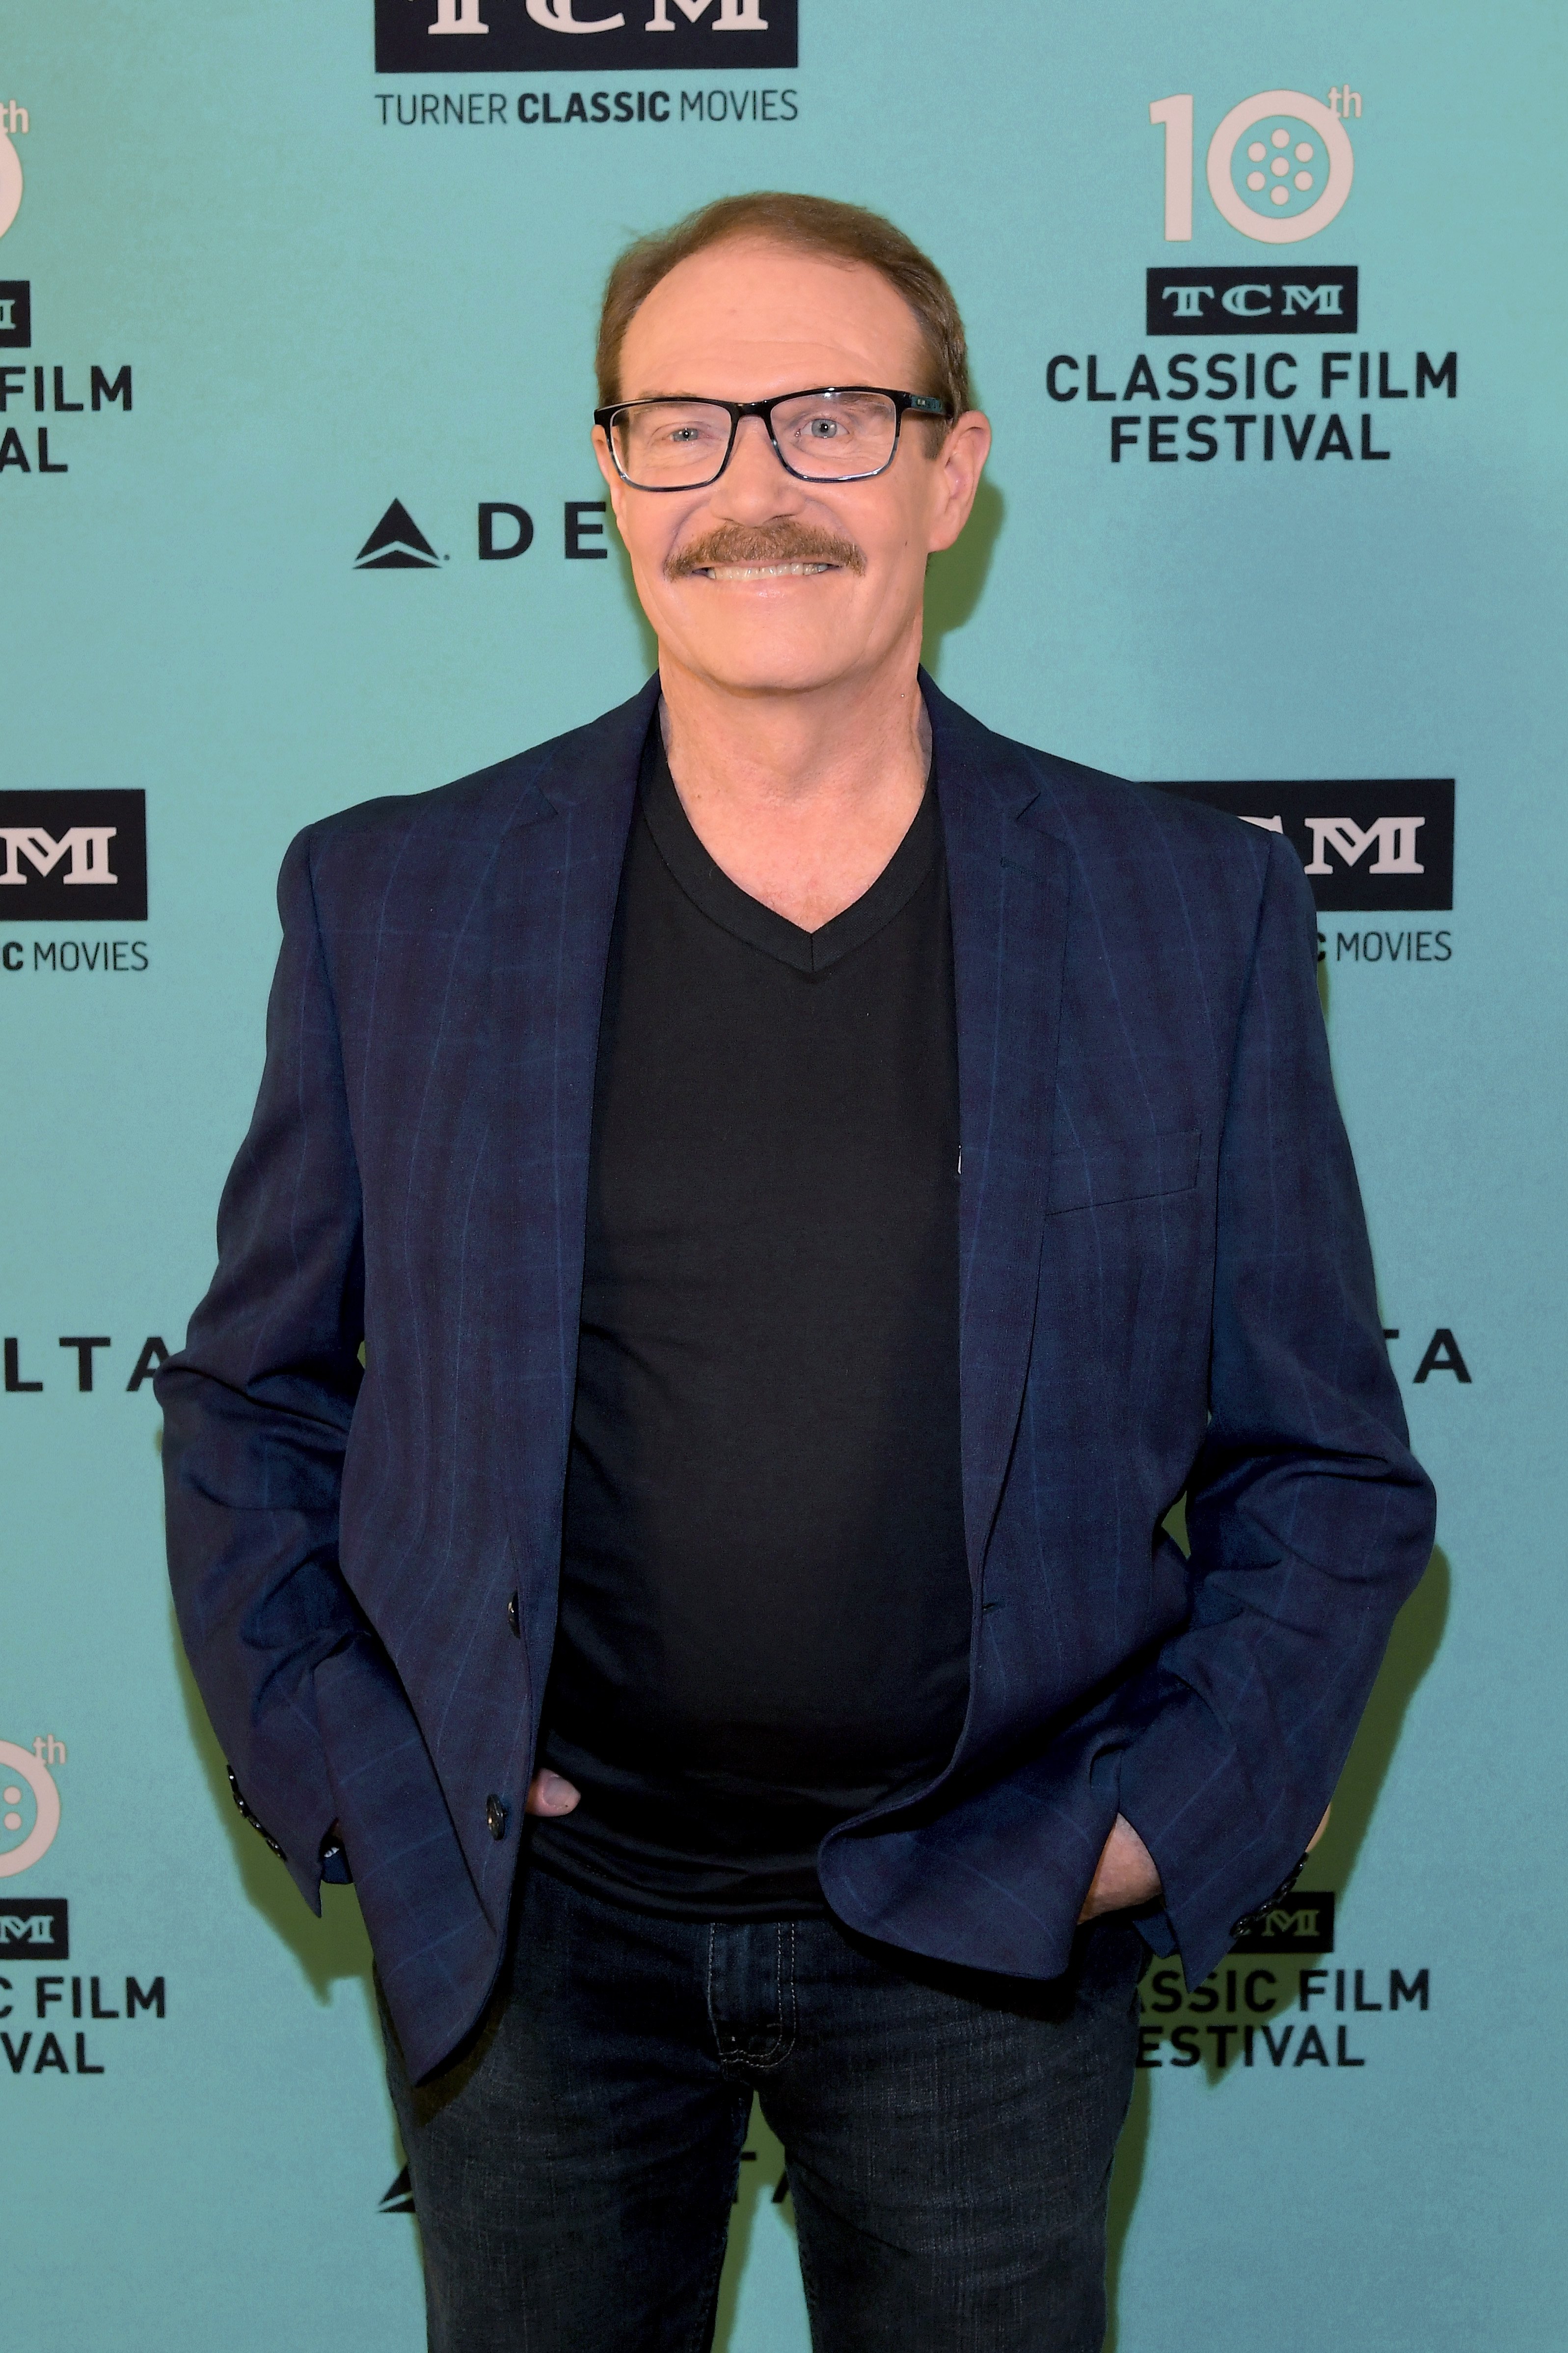  Mitch Vogel atends the screening of 'Yours, Mine, and Ours' on April 14, 2019 | Photo: Getty Images